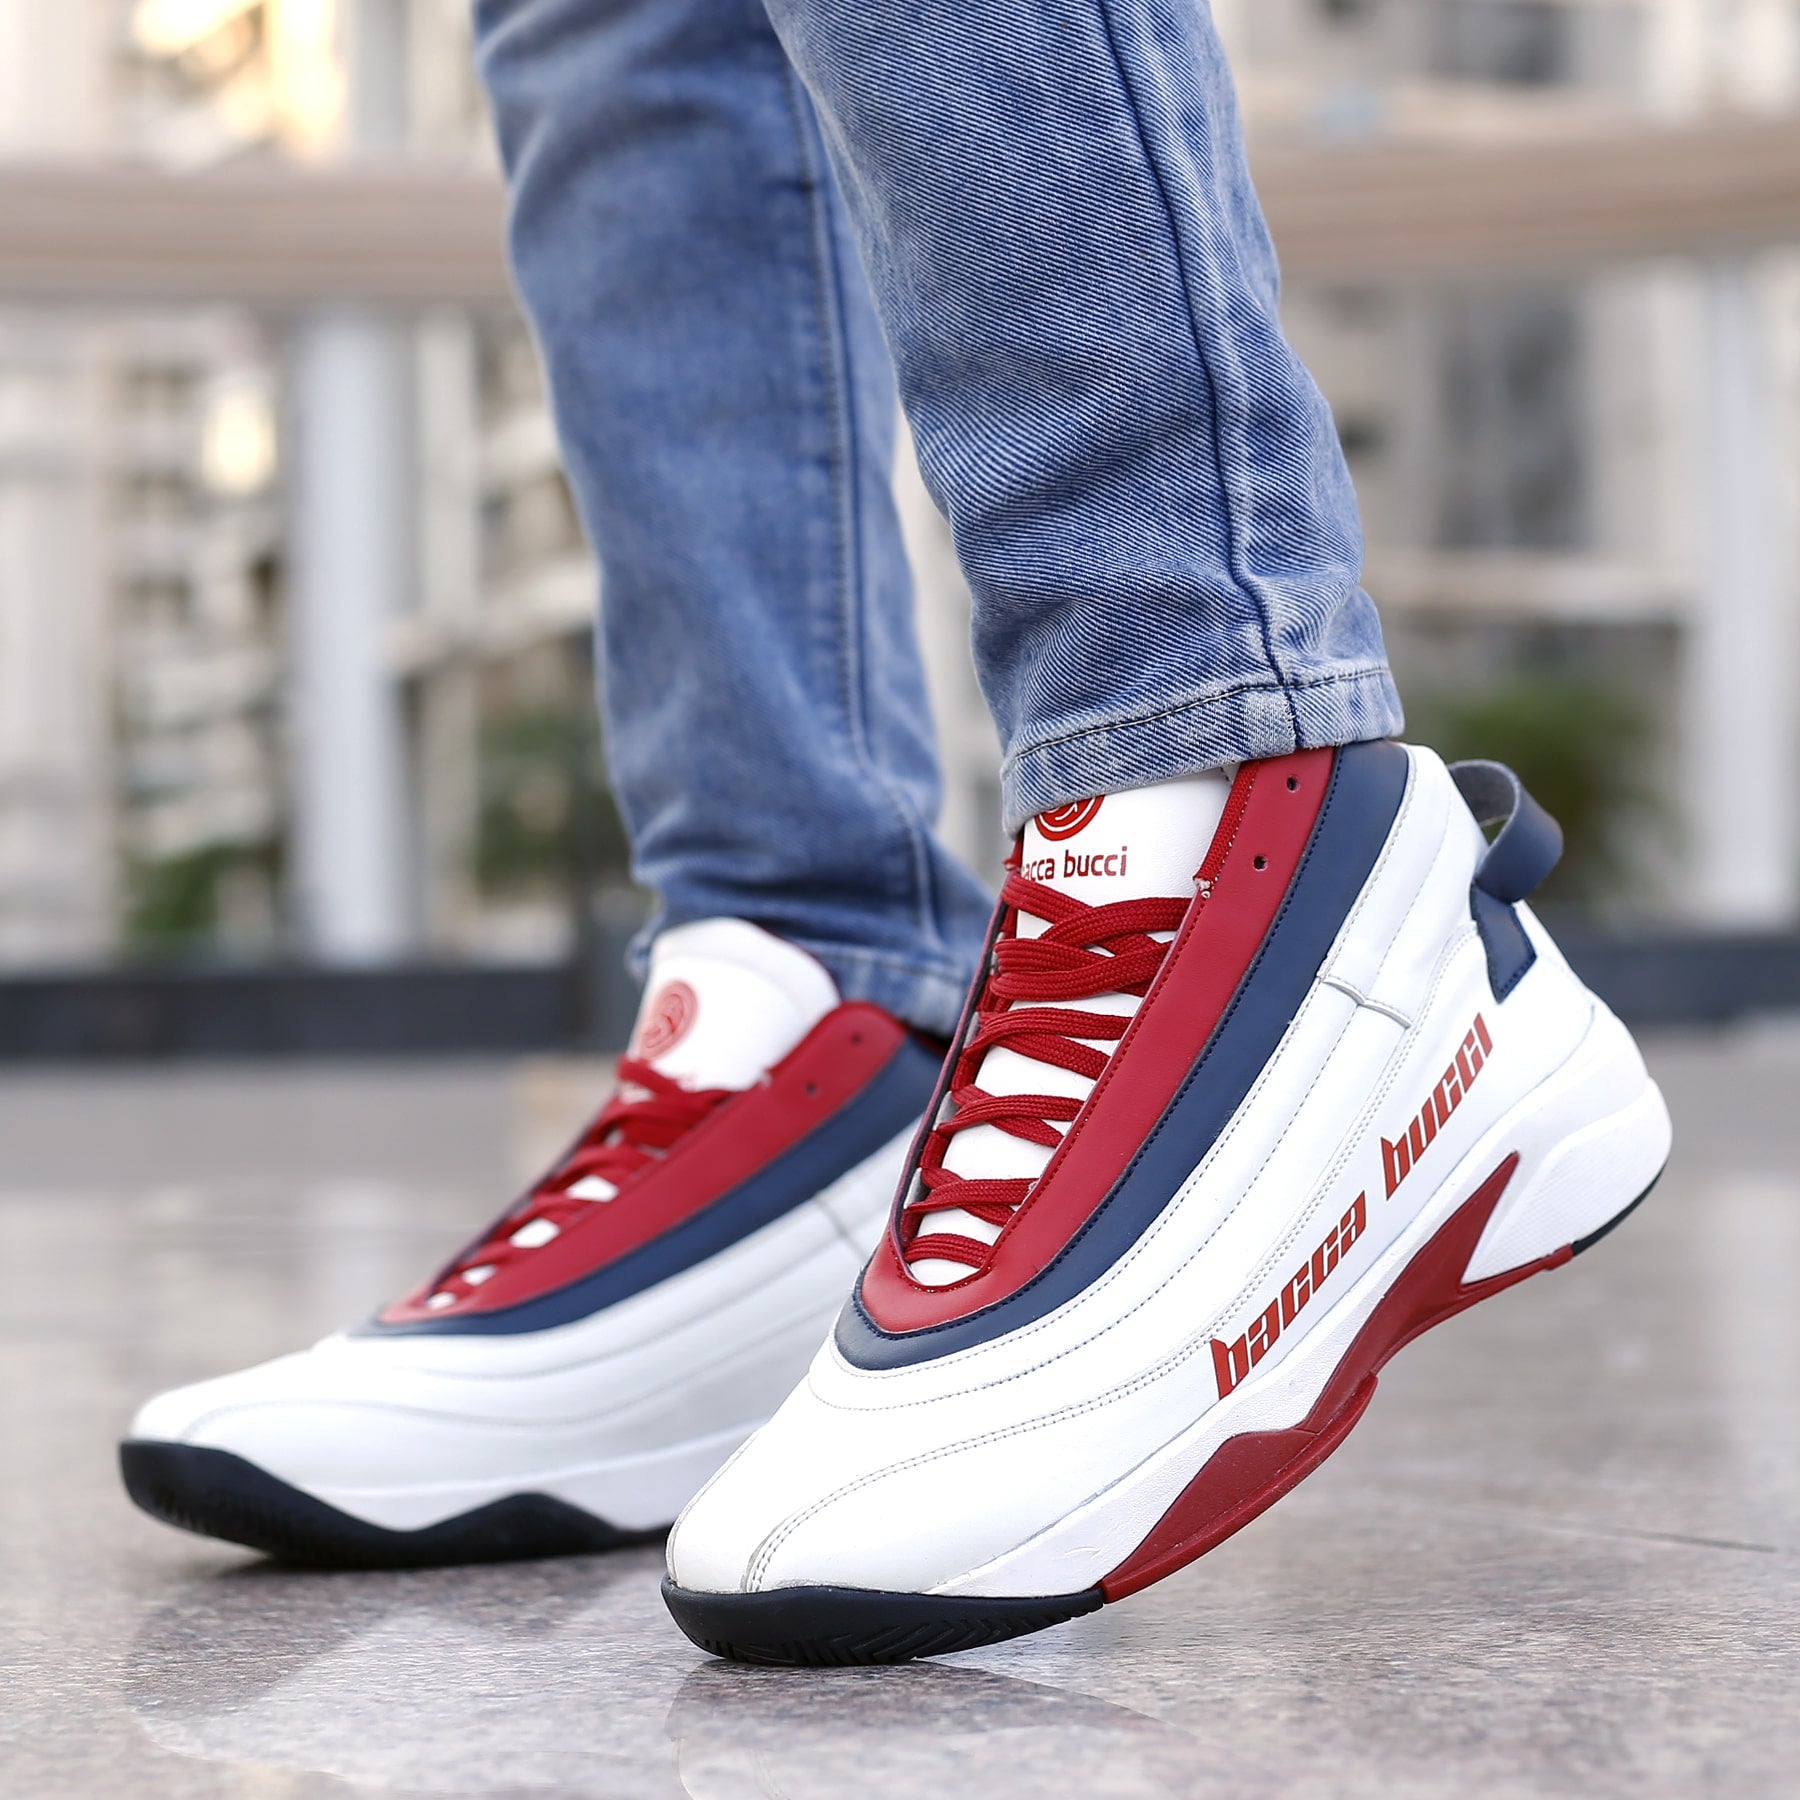 white sneakers for men, red white sneakers for men, casual mens fashion sneakers, high top sneakers, high sole shoes for men